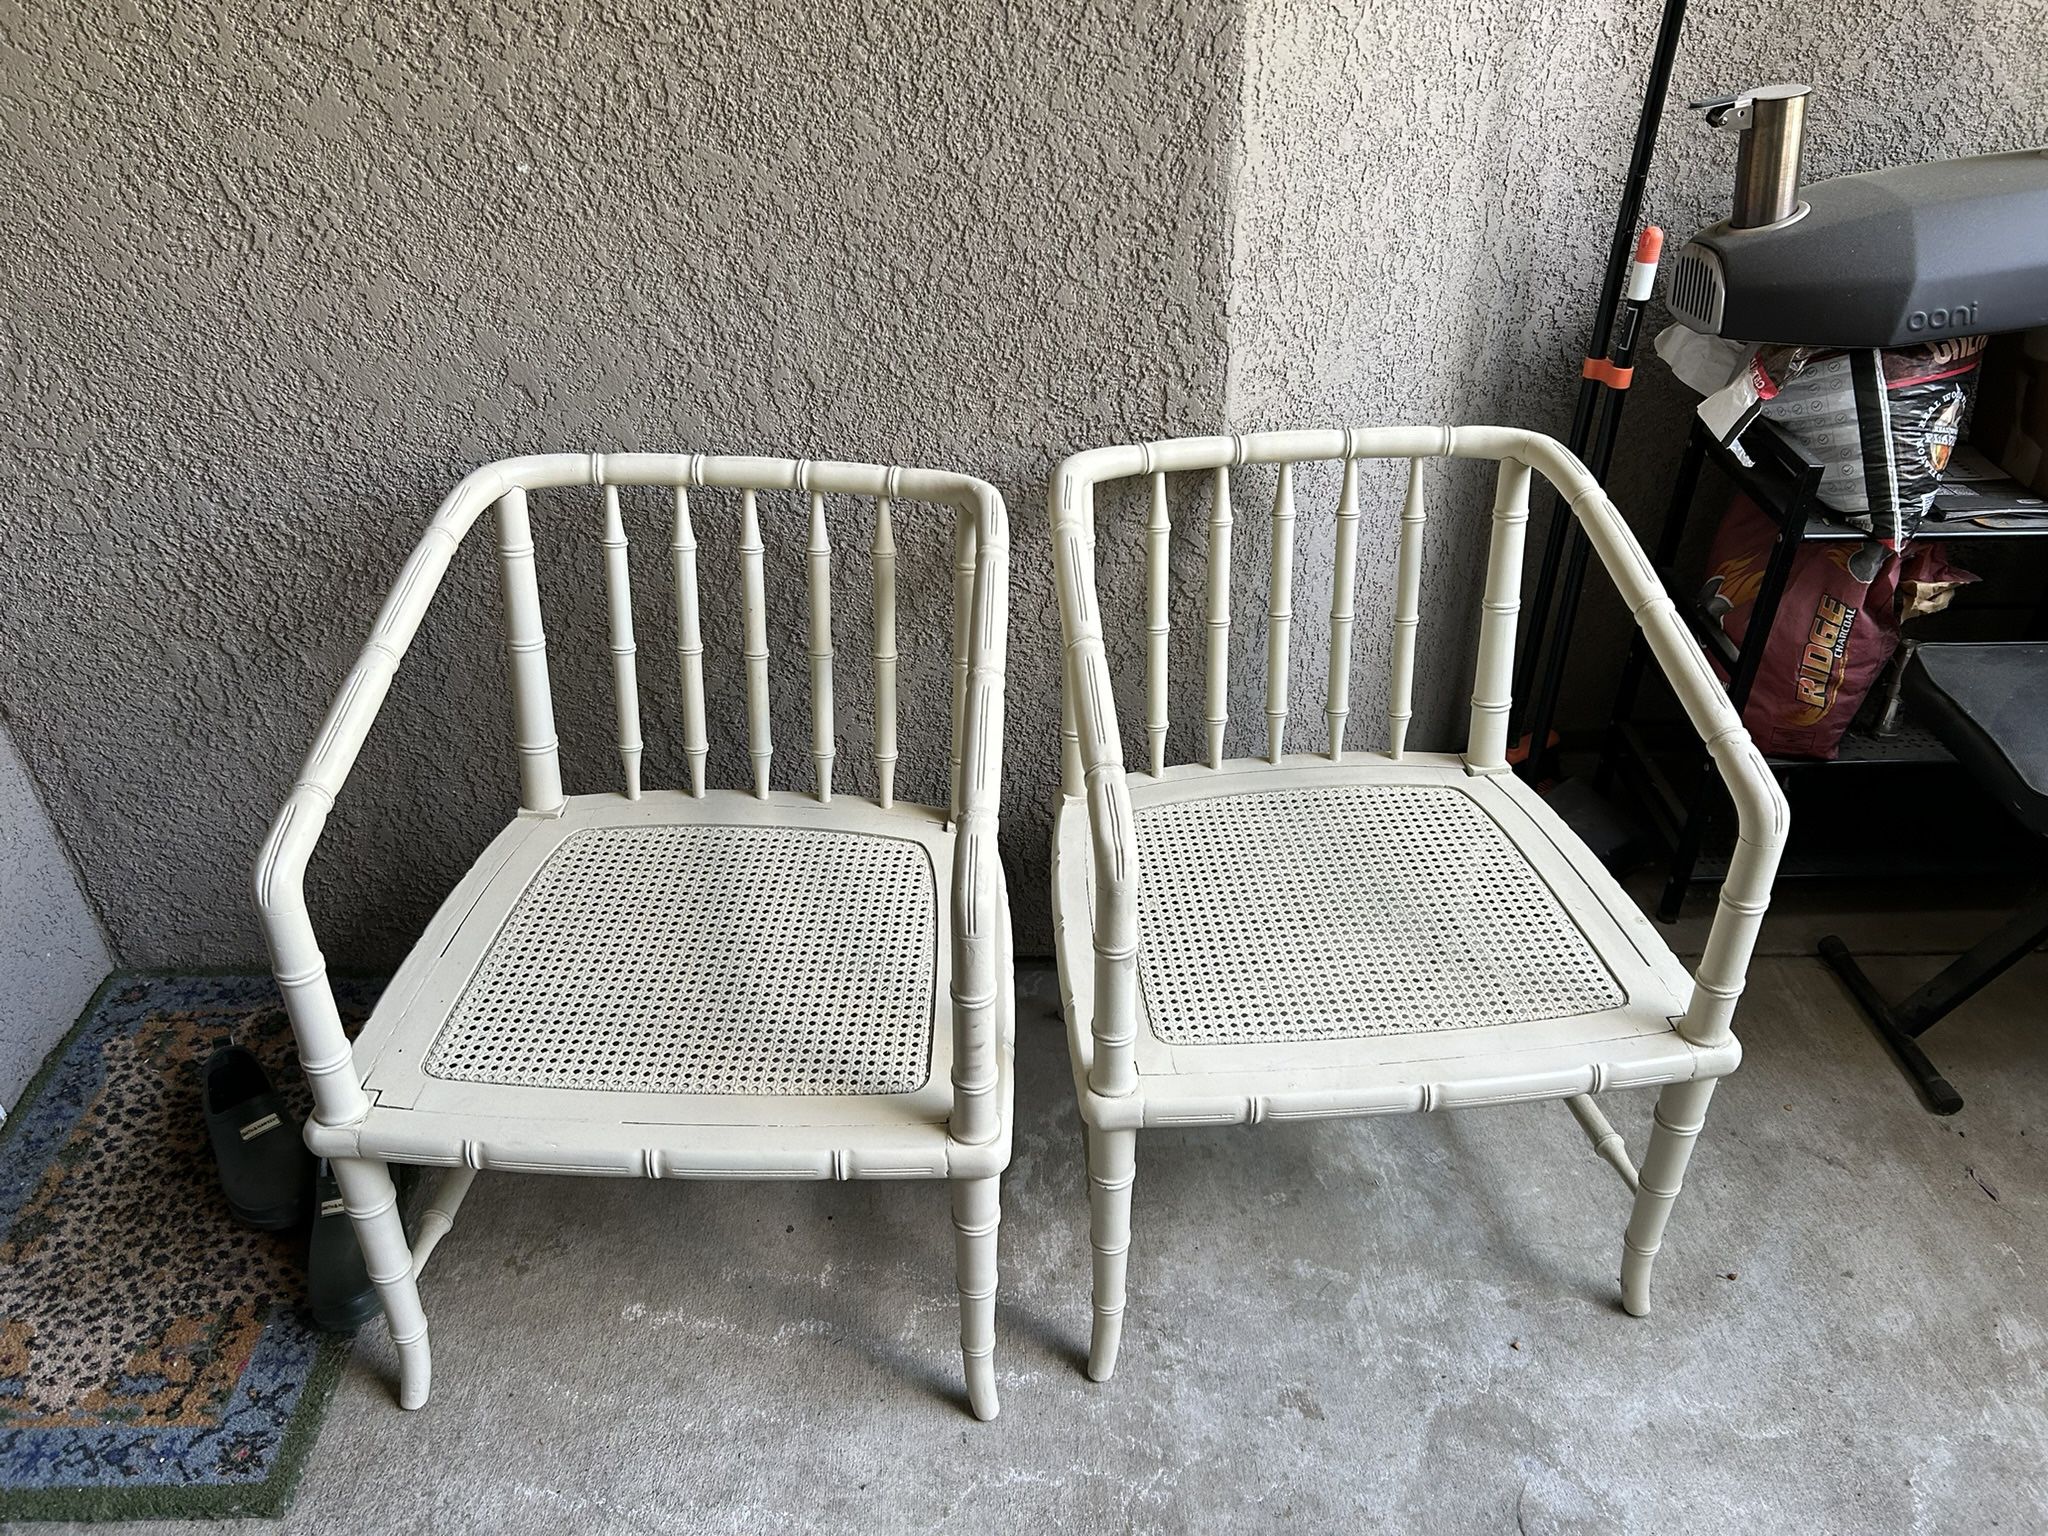 Cute White Bamboo Rattan Outdoor Set Of Two Chairs